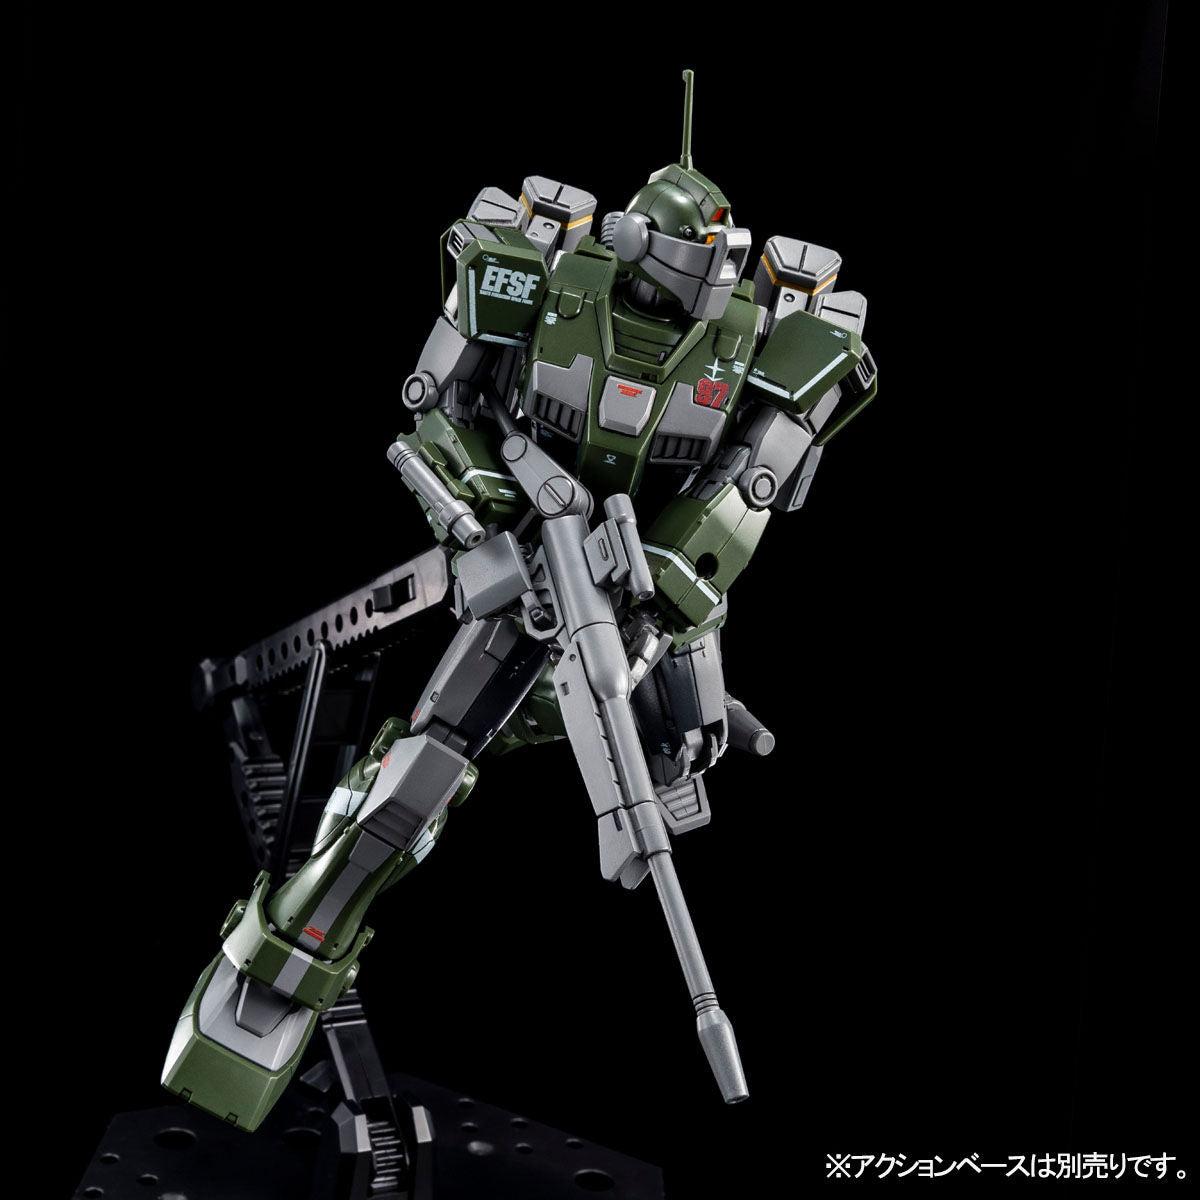 P-Bandai: HG 1/144 GM Sniper Custom Missile and Launcher Equipment [End of JUNE 2021]